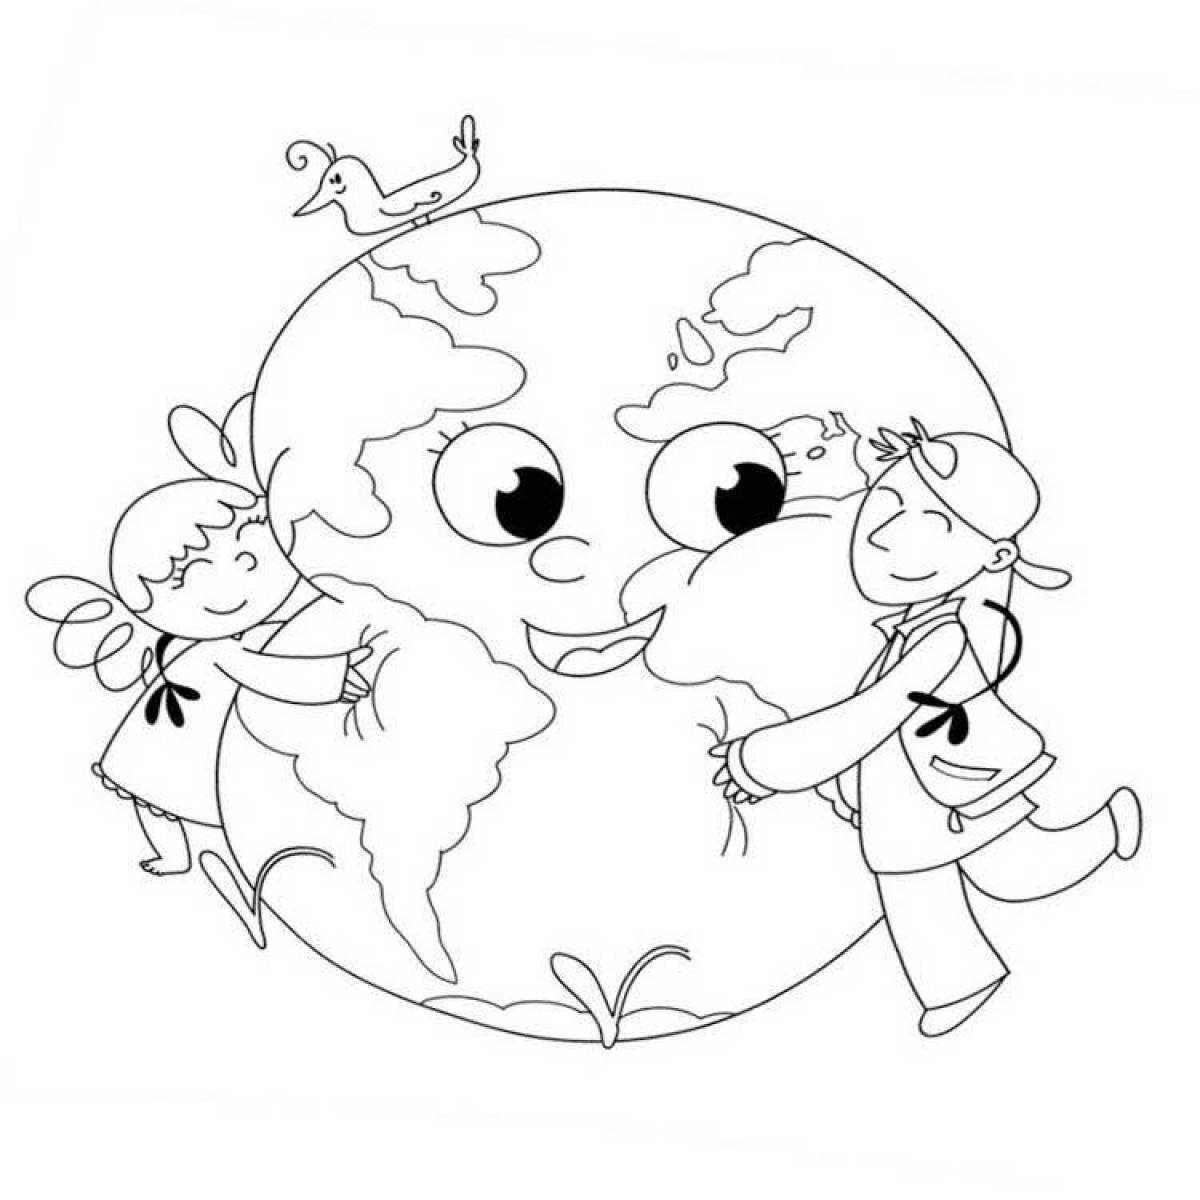 Fun coloring planet earth for kids